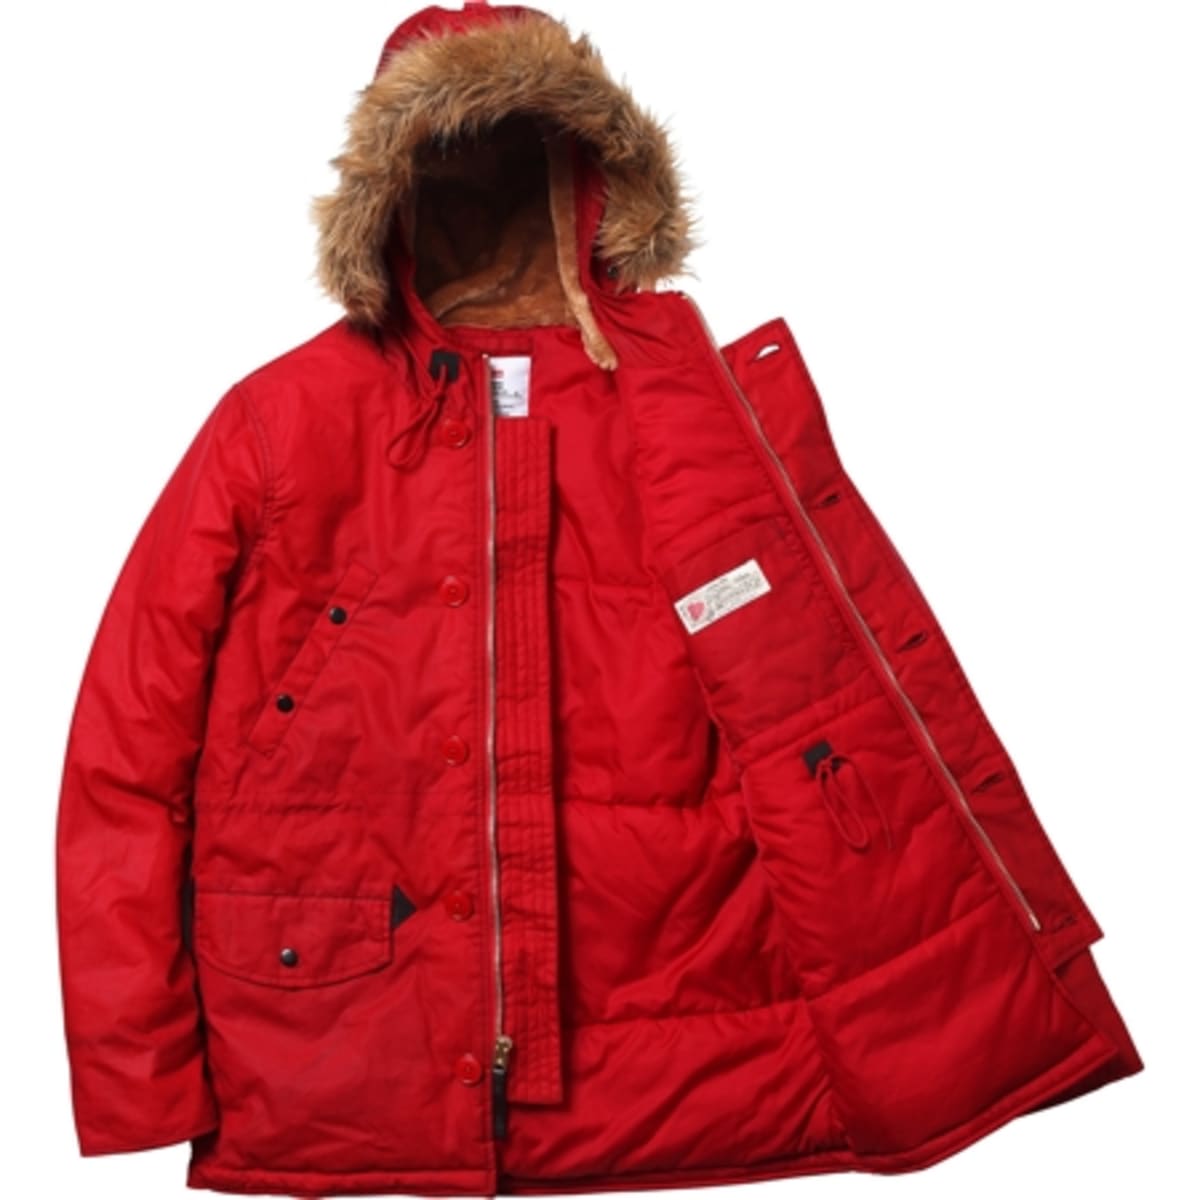 Supreme's Waxed Cotton N-3B Jacket is Better Than the Average Parka